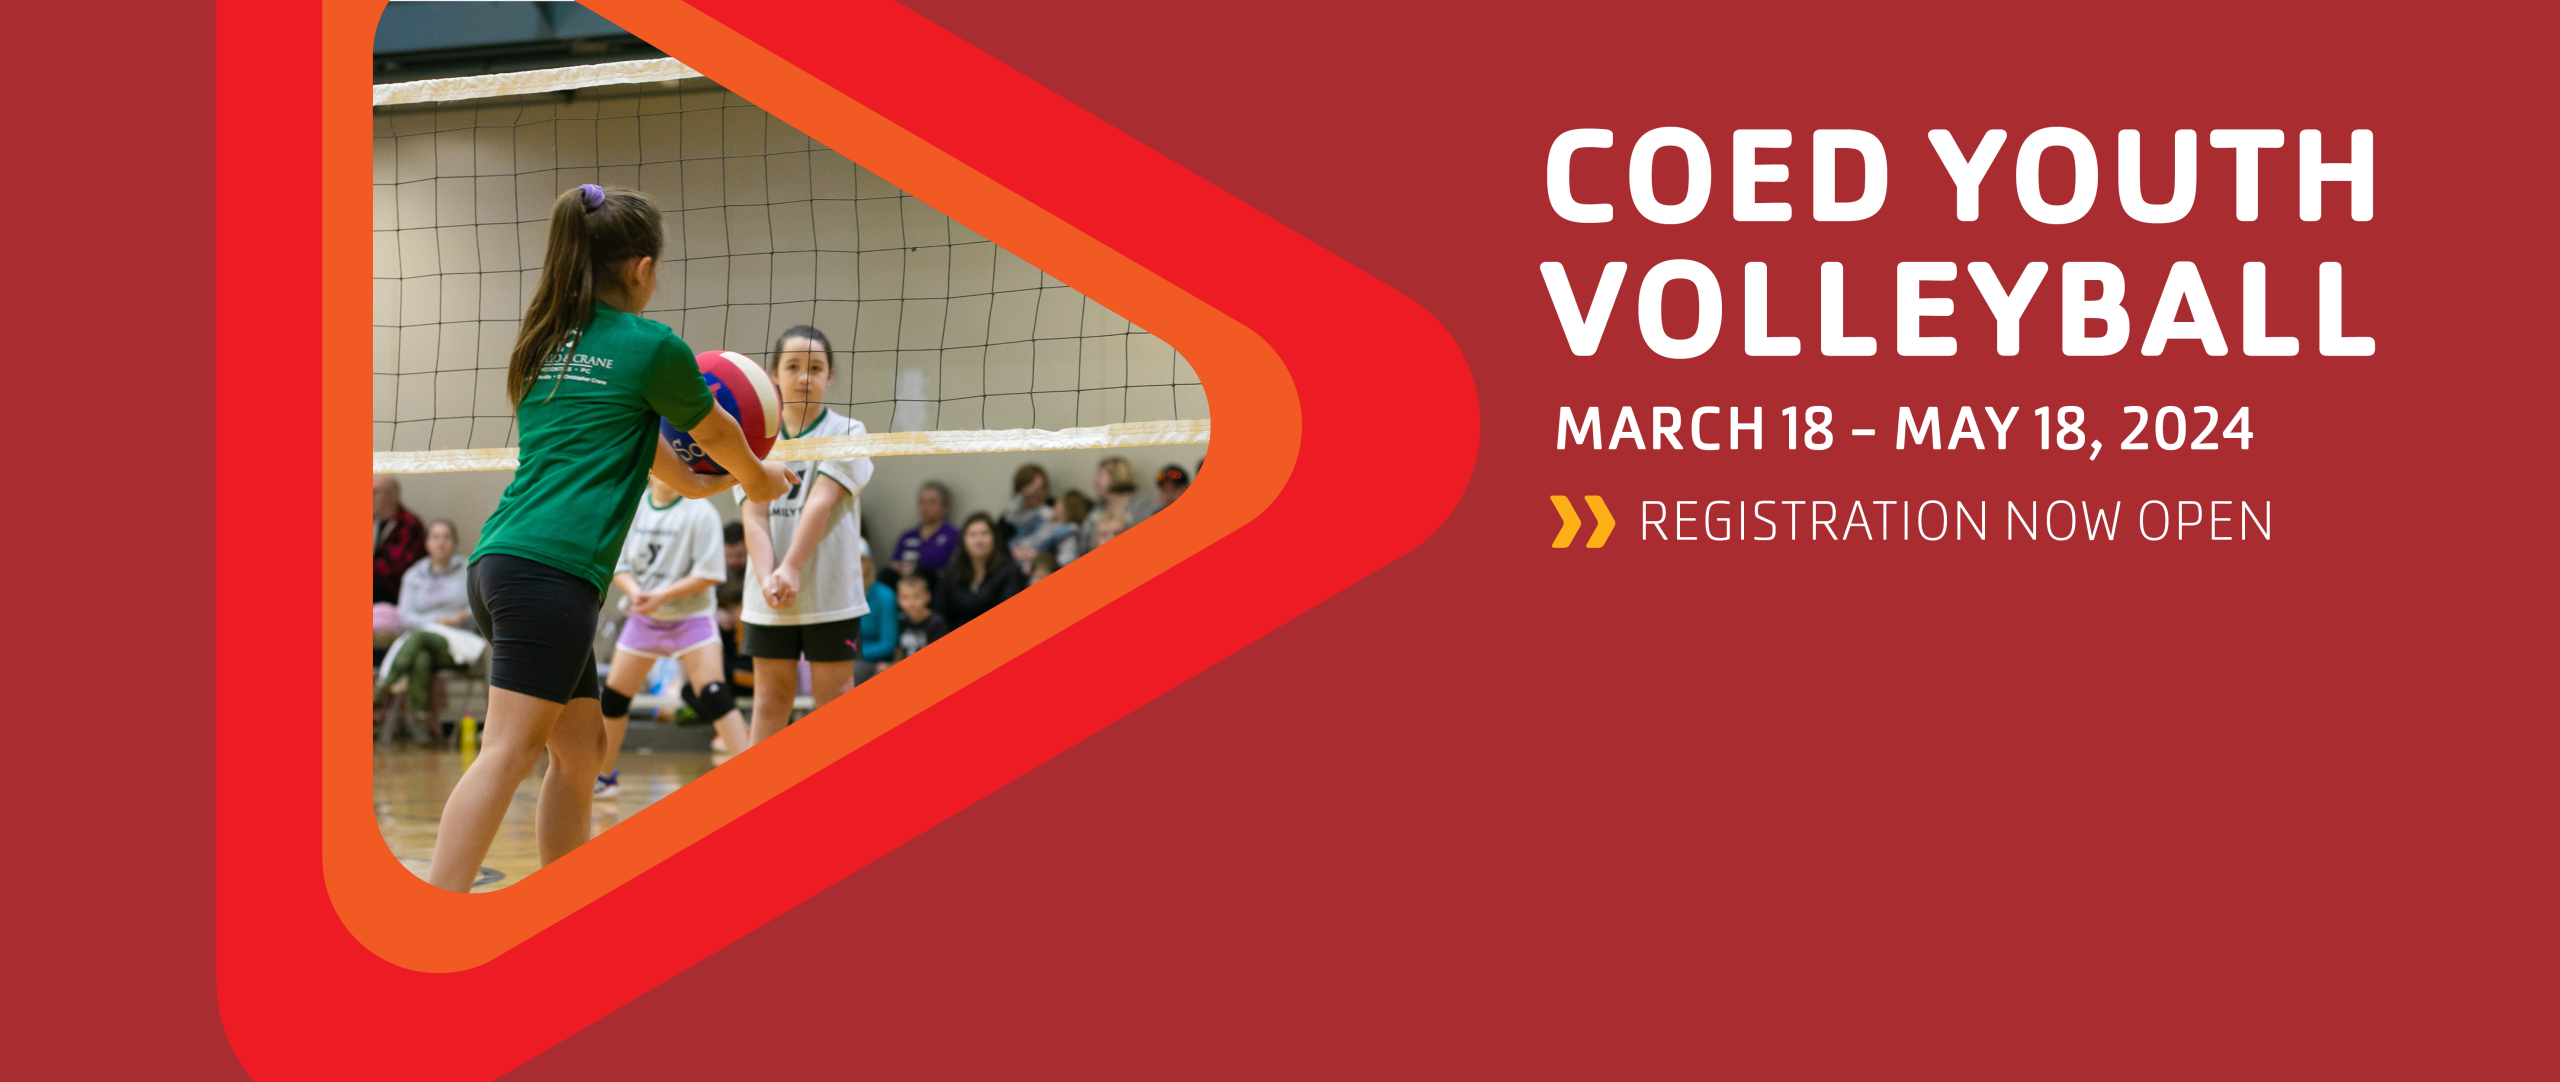 https://www.valpoymca.org/sites/default/files/revslider/image/Youth%20Volleyball%20Website%20Gallery.png